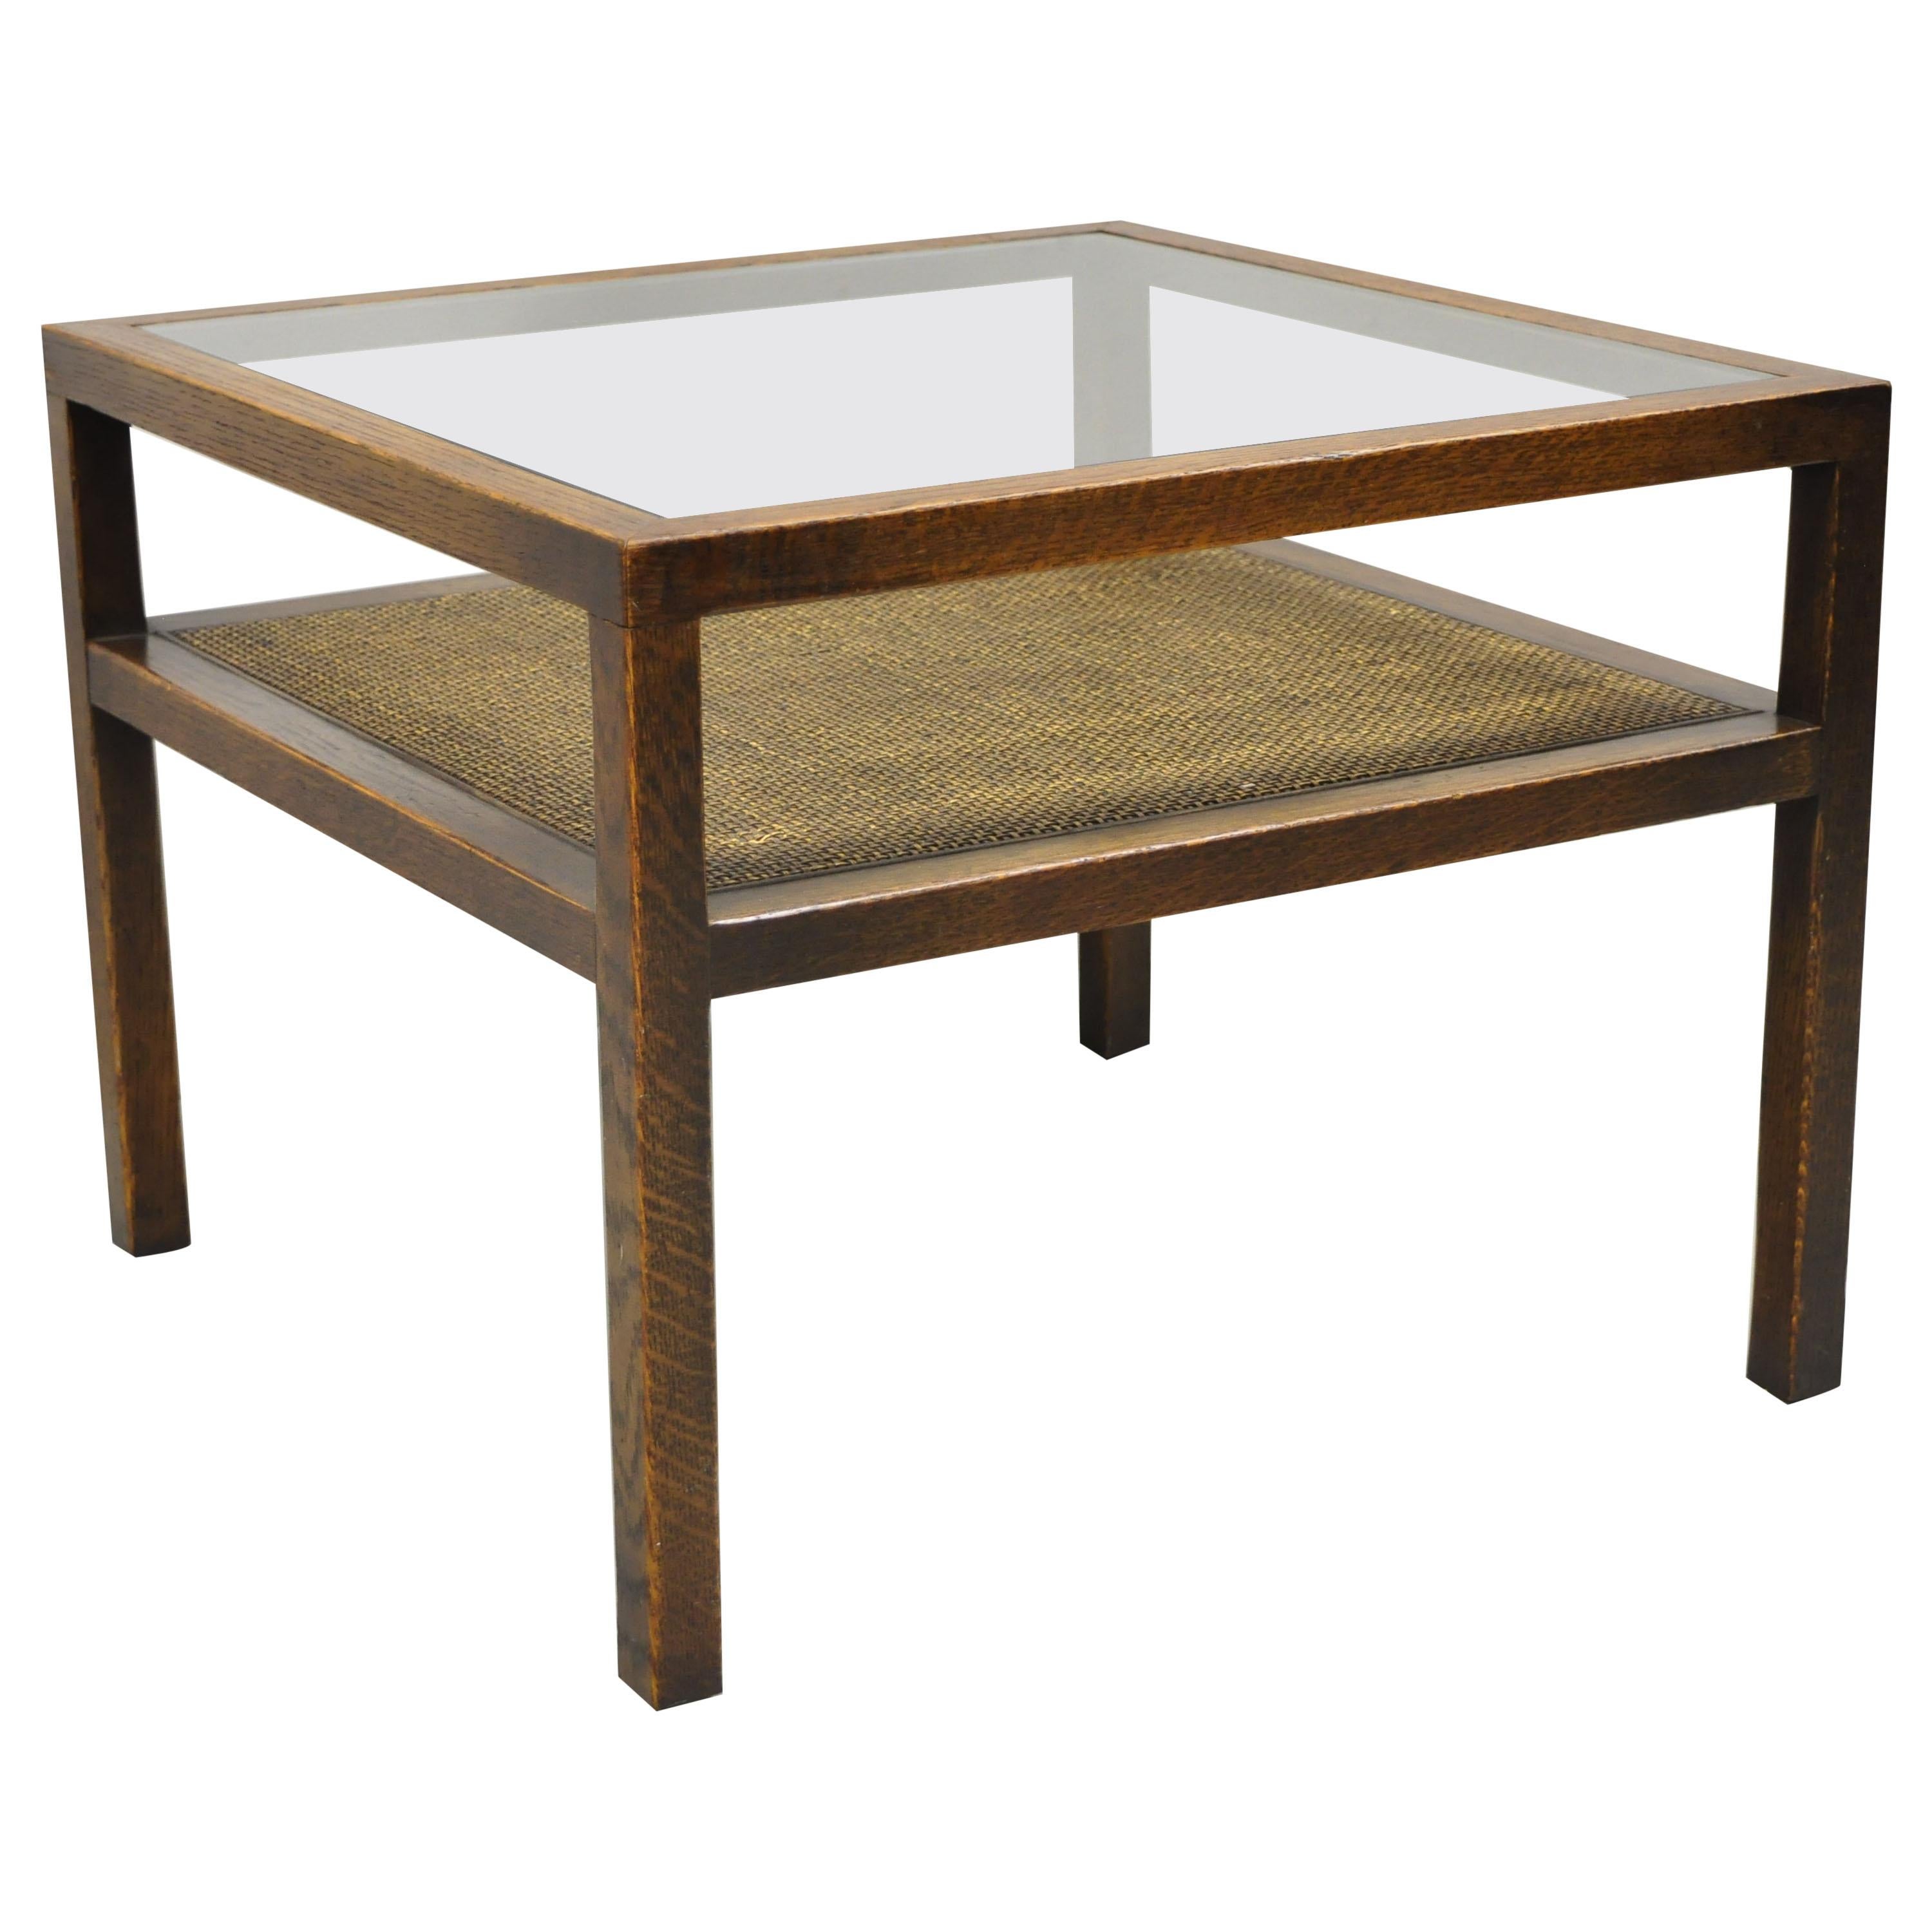 Mid-Century Modern Oak Wood and Cane 2 Tier Glass Top Side Table Dunbar Style For Sale